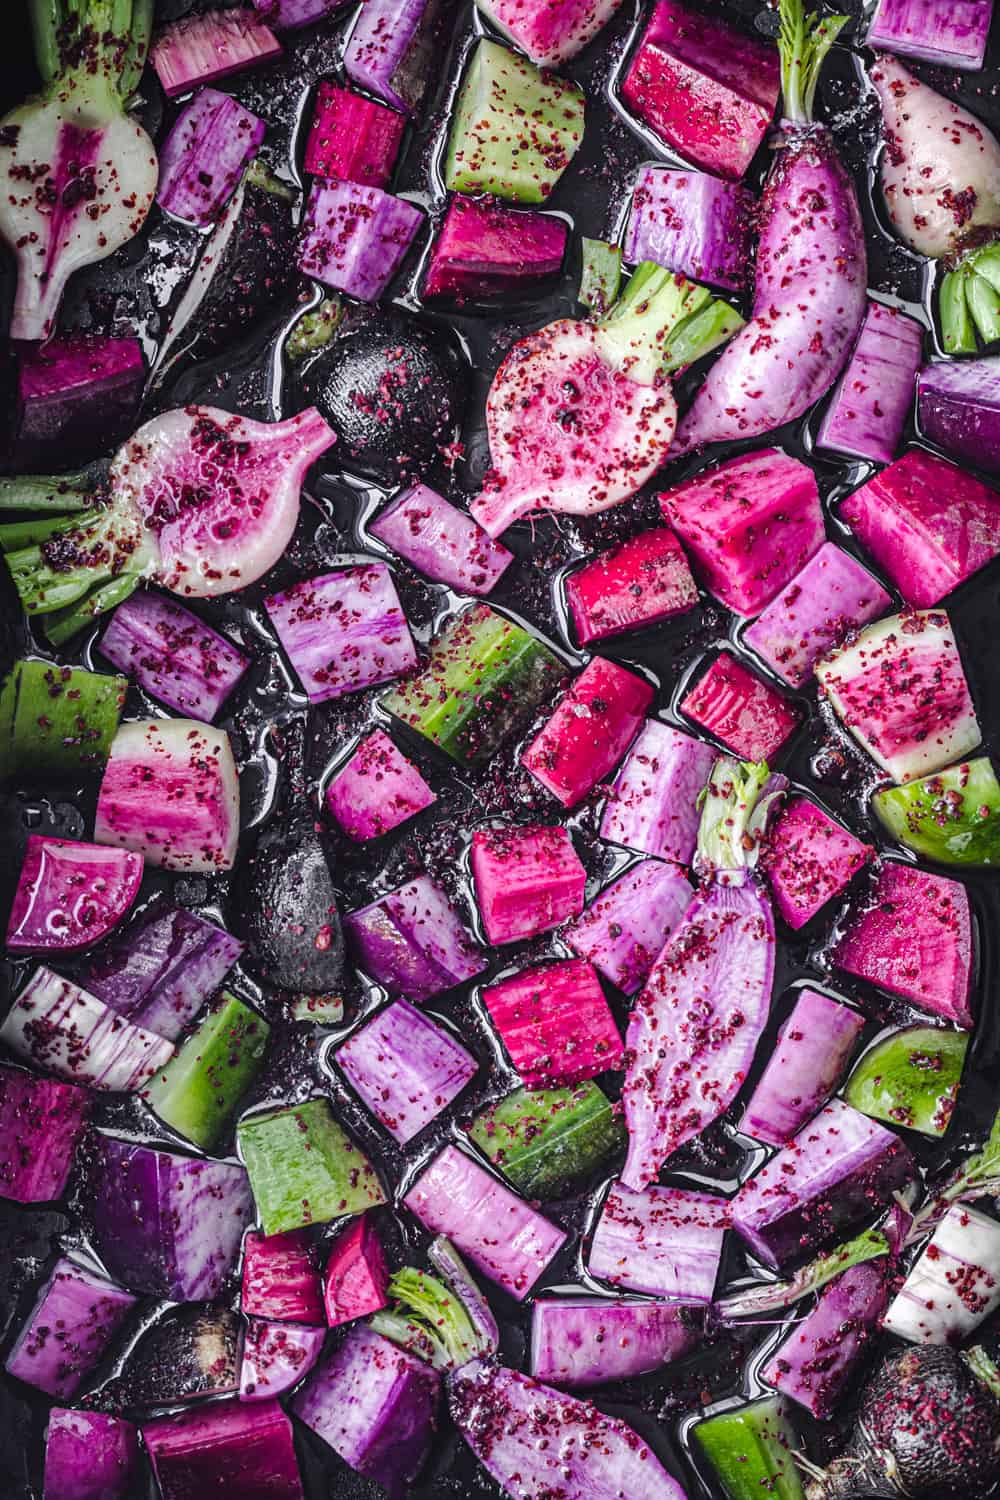 pink, purple, green and black raw radishes, cut into bite sized pieces and tossed with olive oil, sumac, salt and pepper; overhead shot.